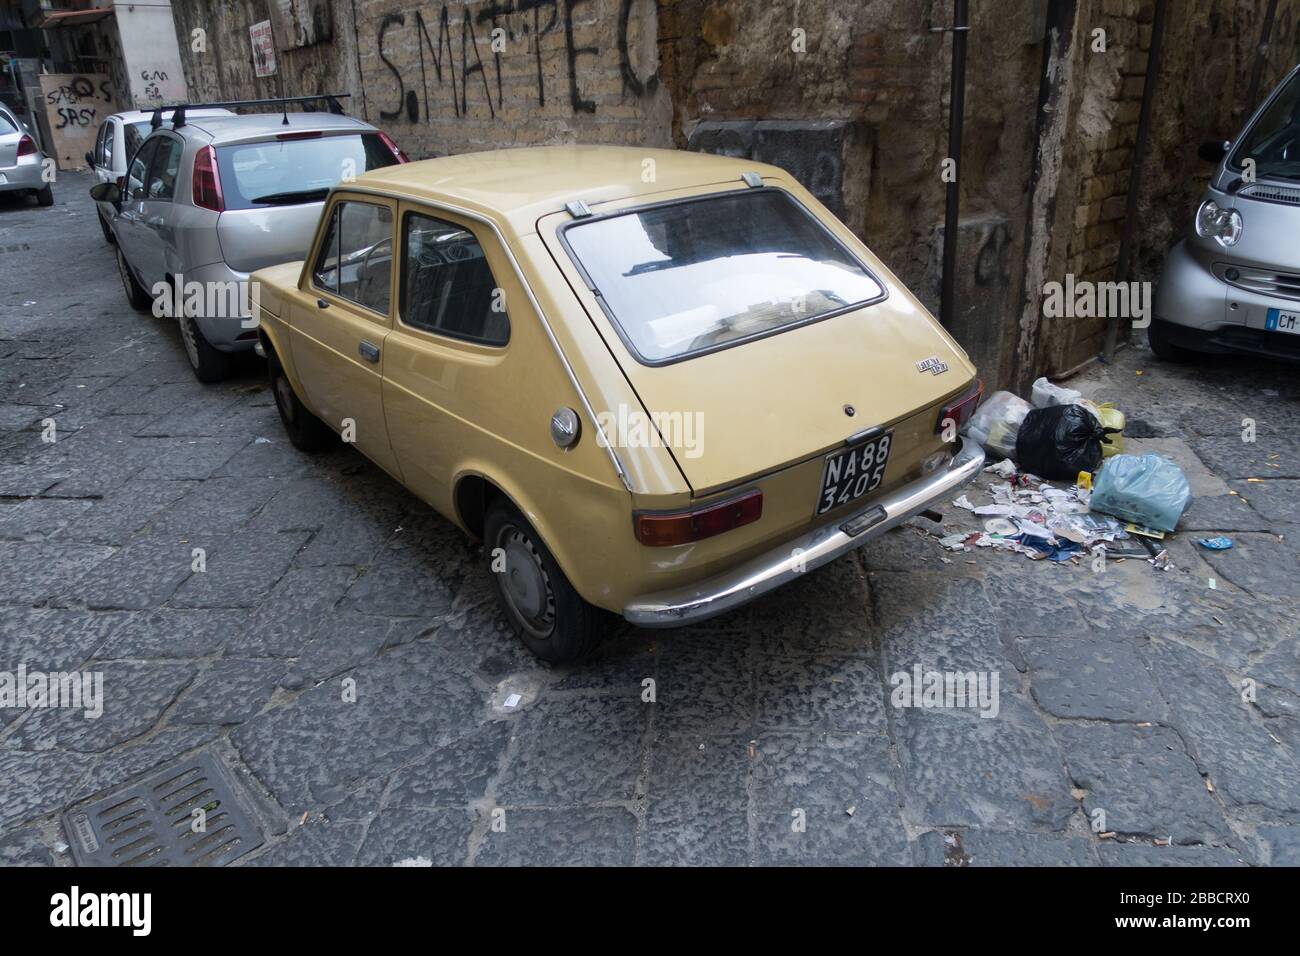 The rear view of an old FIAT 127 car in a street of Naples, Italy. Stock Photo